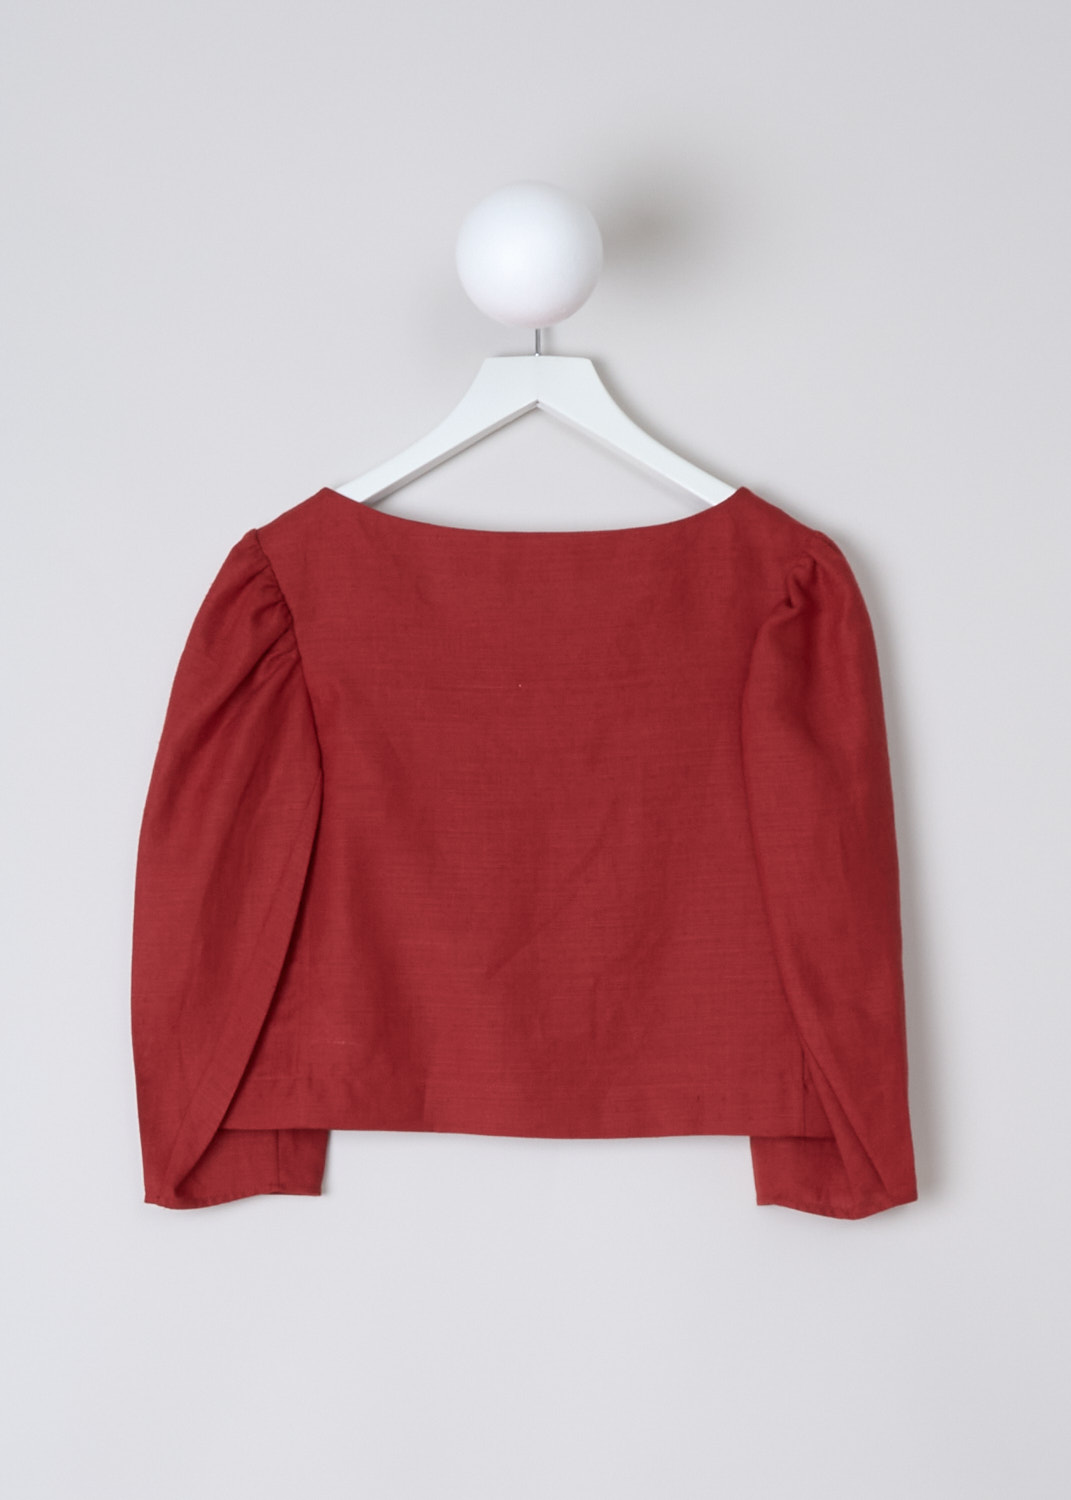 CHLOÉ, CROPPED LINEN TOP IN PEPPERY RED, CHC23UHT13030649_PEPPERY_RED, Red, Back, This Peppery Red linen top has a boat neckline. The long puff sleeves have straight ends. The top has a cropped length and a straight hemline. 
